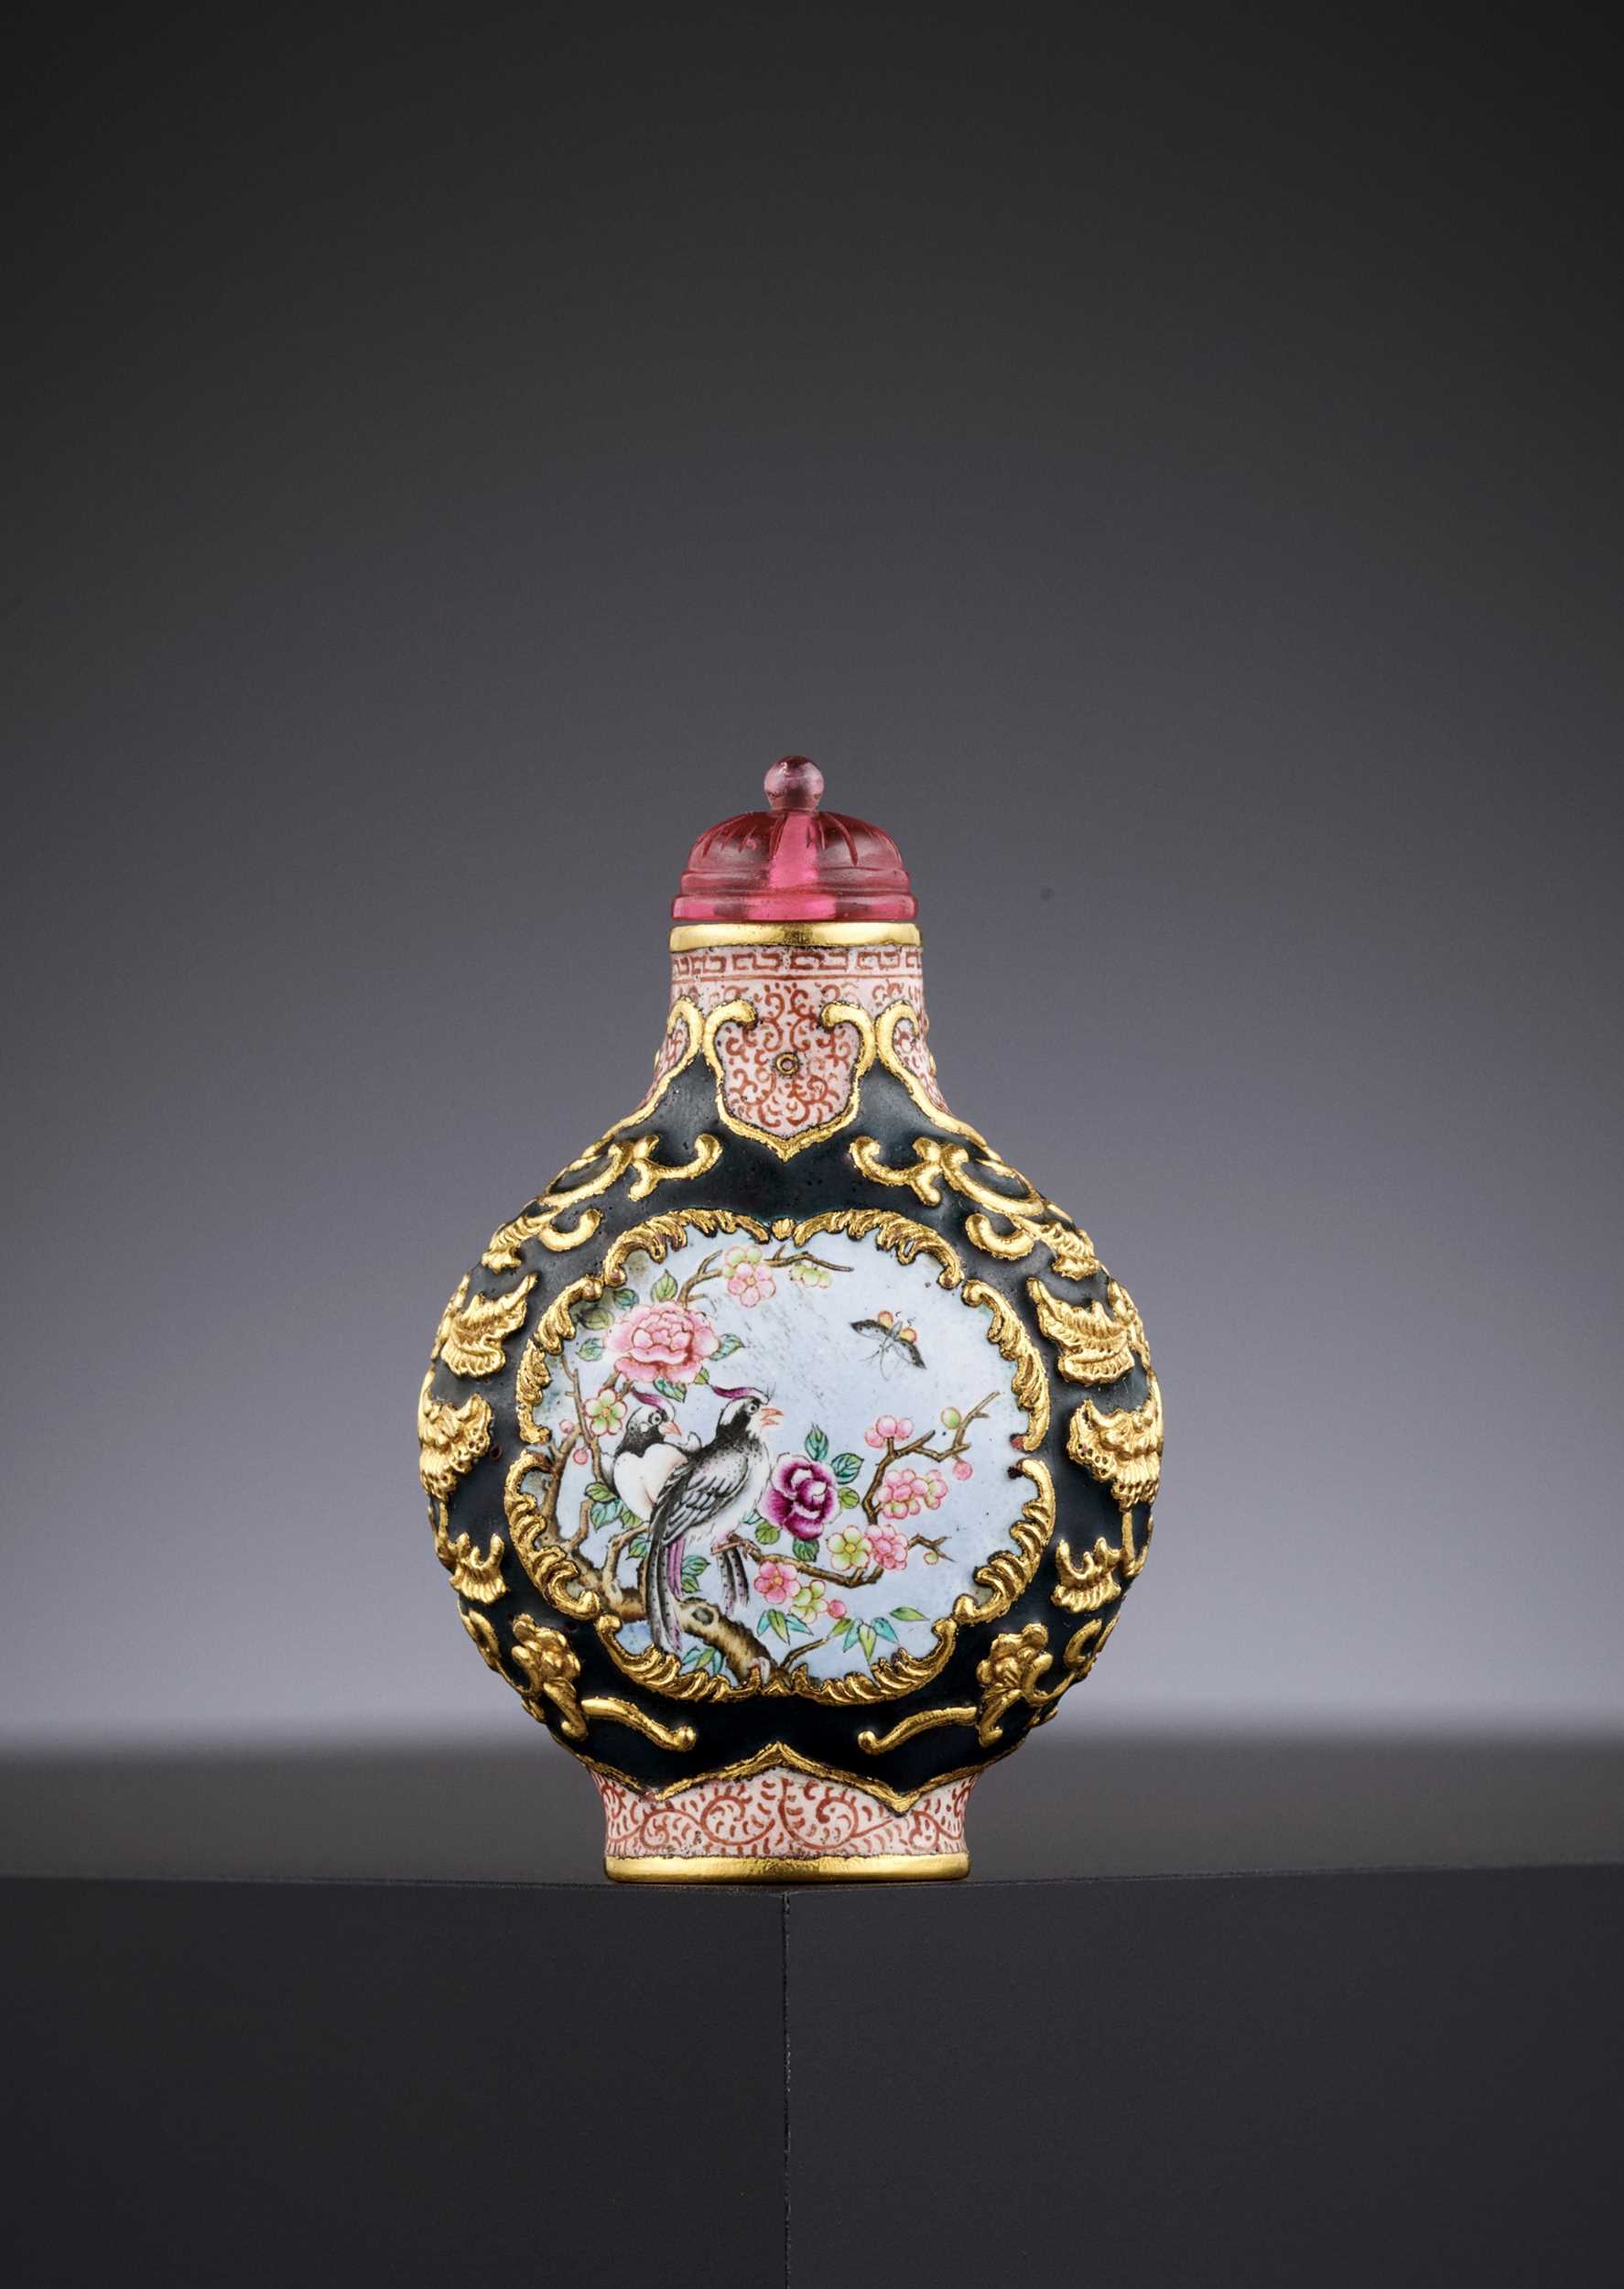 Lot 313 - AN IMPERIAL BEIJING ENAMEL GILT COPPER SNUFF BOTTLE, PALACE WORKSHOPS, QIANLONG BLUE ENAMEL FOUR-CHARACTER MARK AND OF THE PERIOD